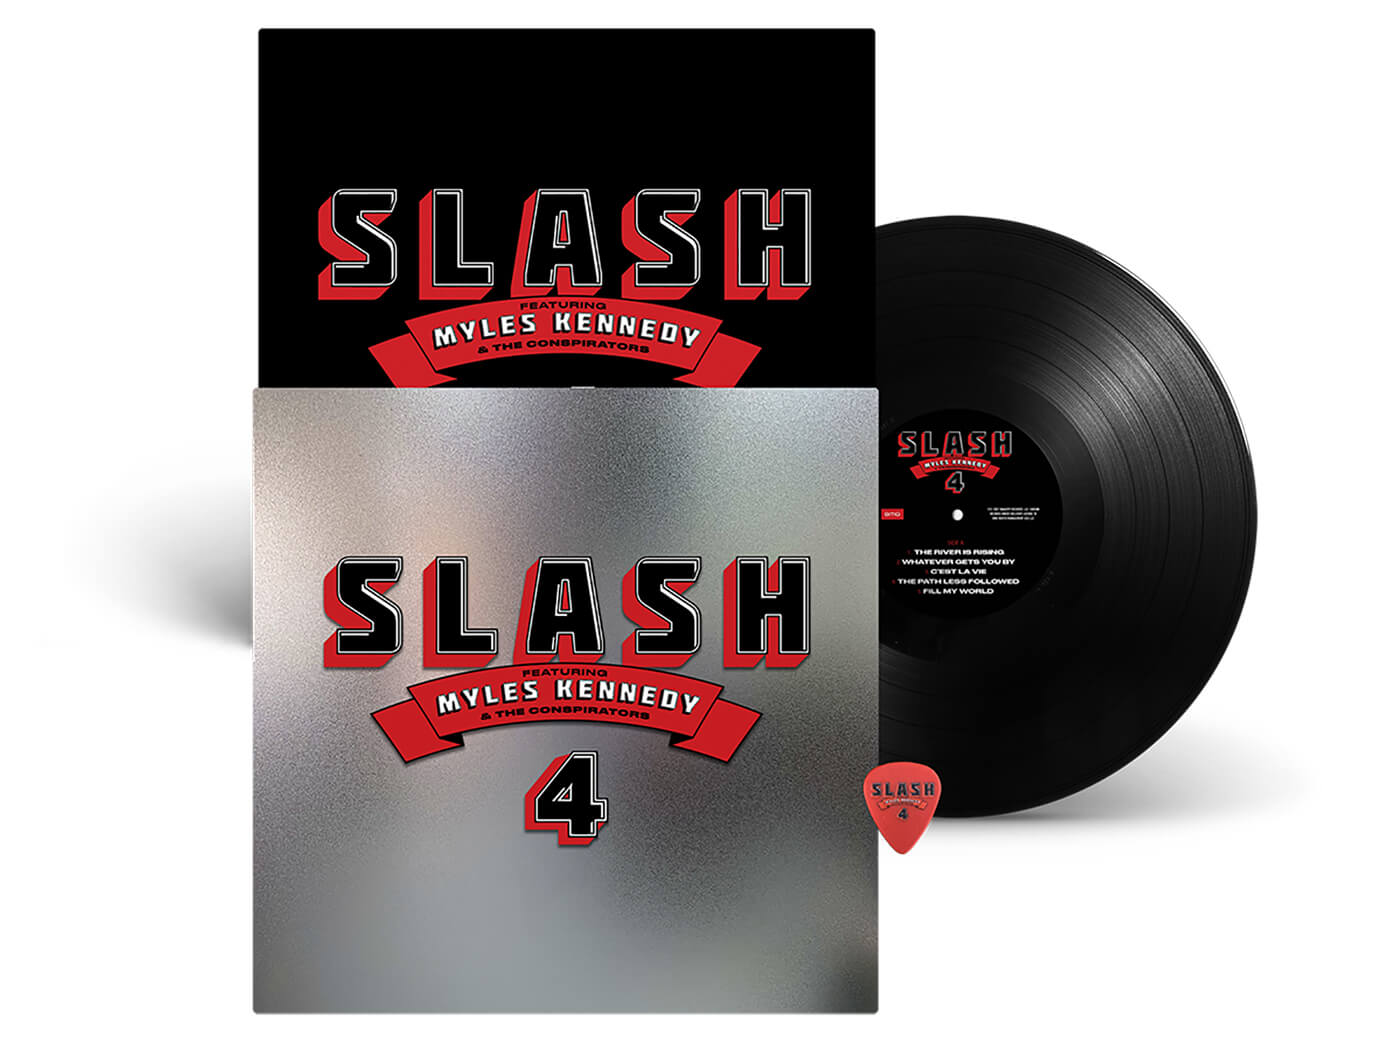 Slash featuring Myles Kennedy and The Conspirators - 4